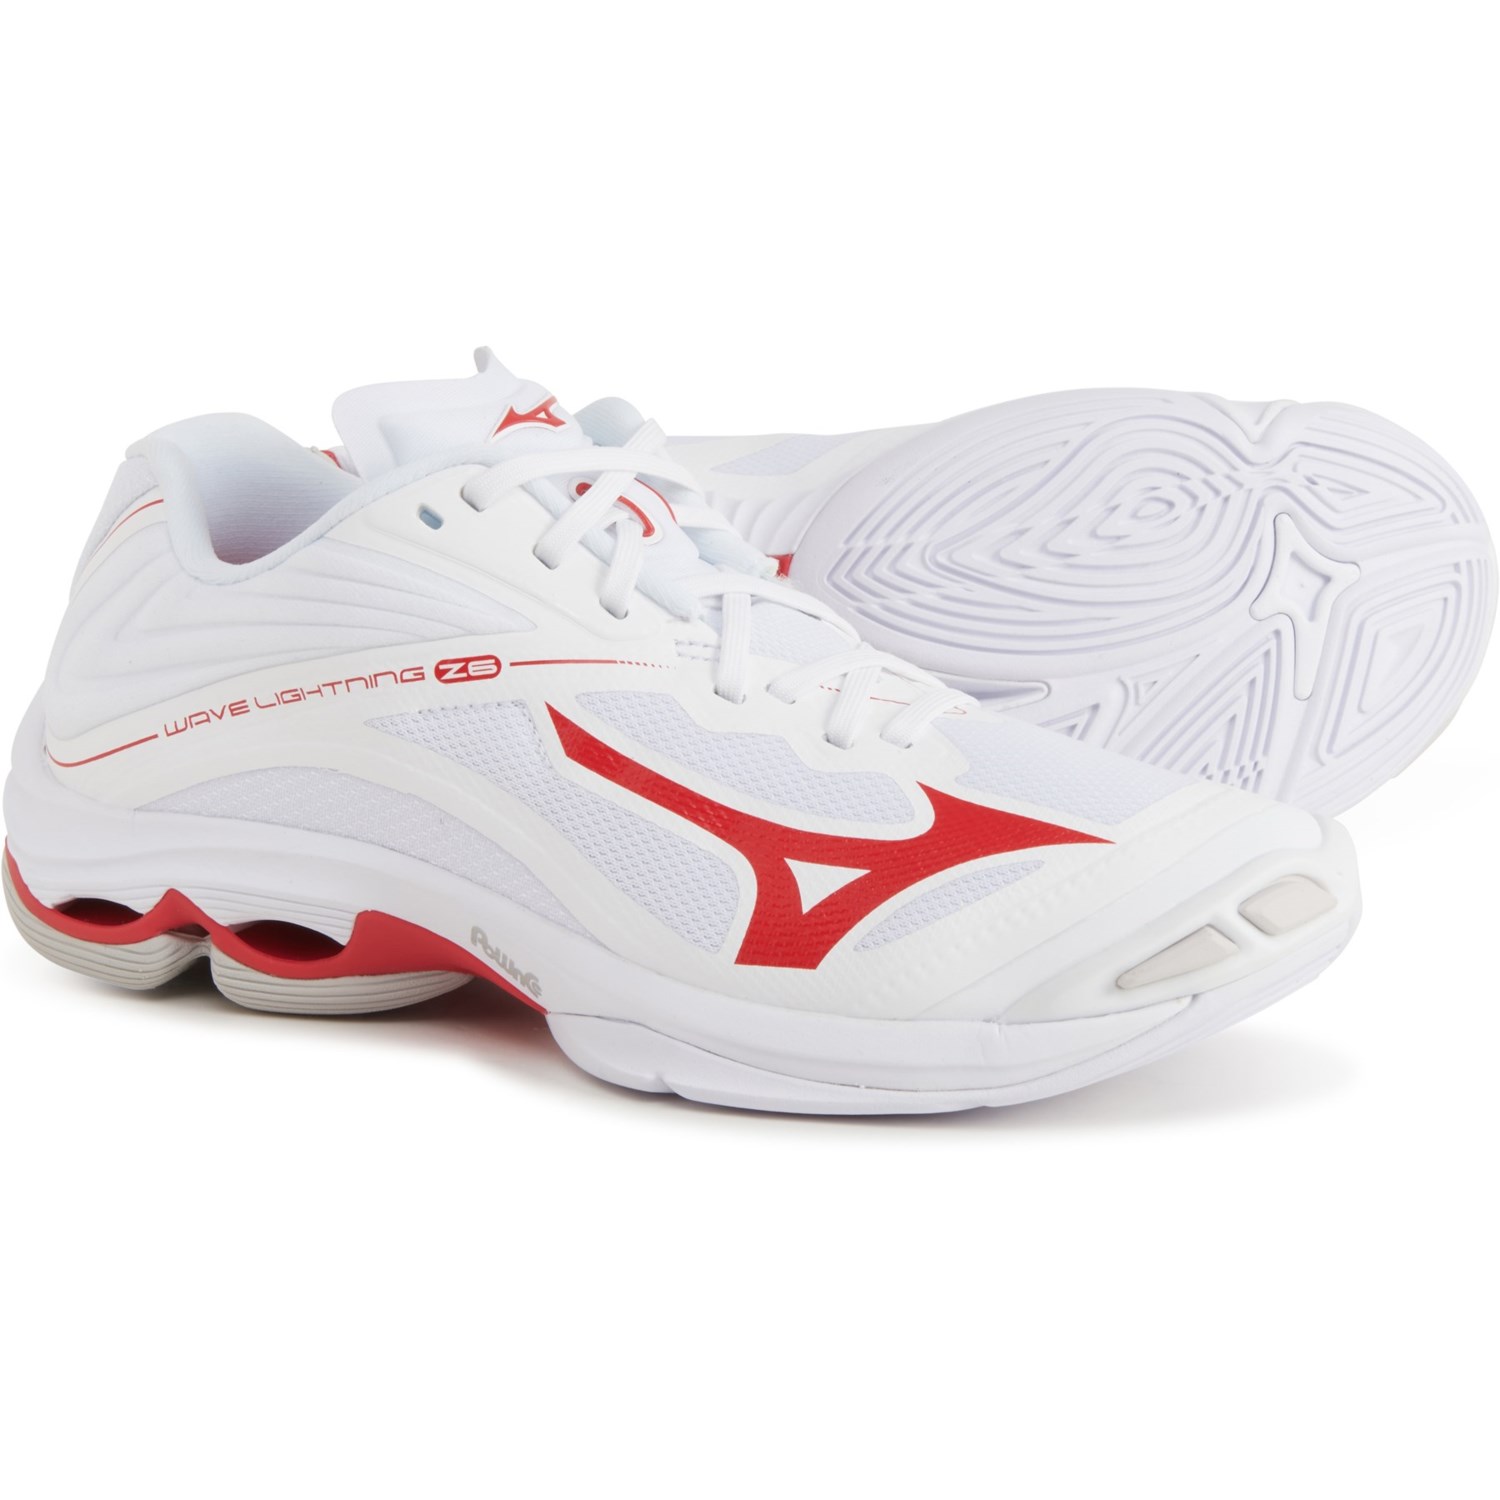 () ~Ym fB[X EF[u CgjO Z6 o[{[ V[Y Mizuno women Wave Lightning Z6 Volleyball Shoes (For Women) White/Red